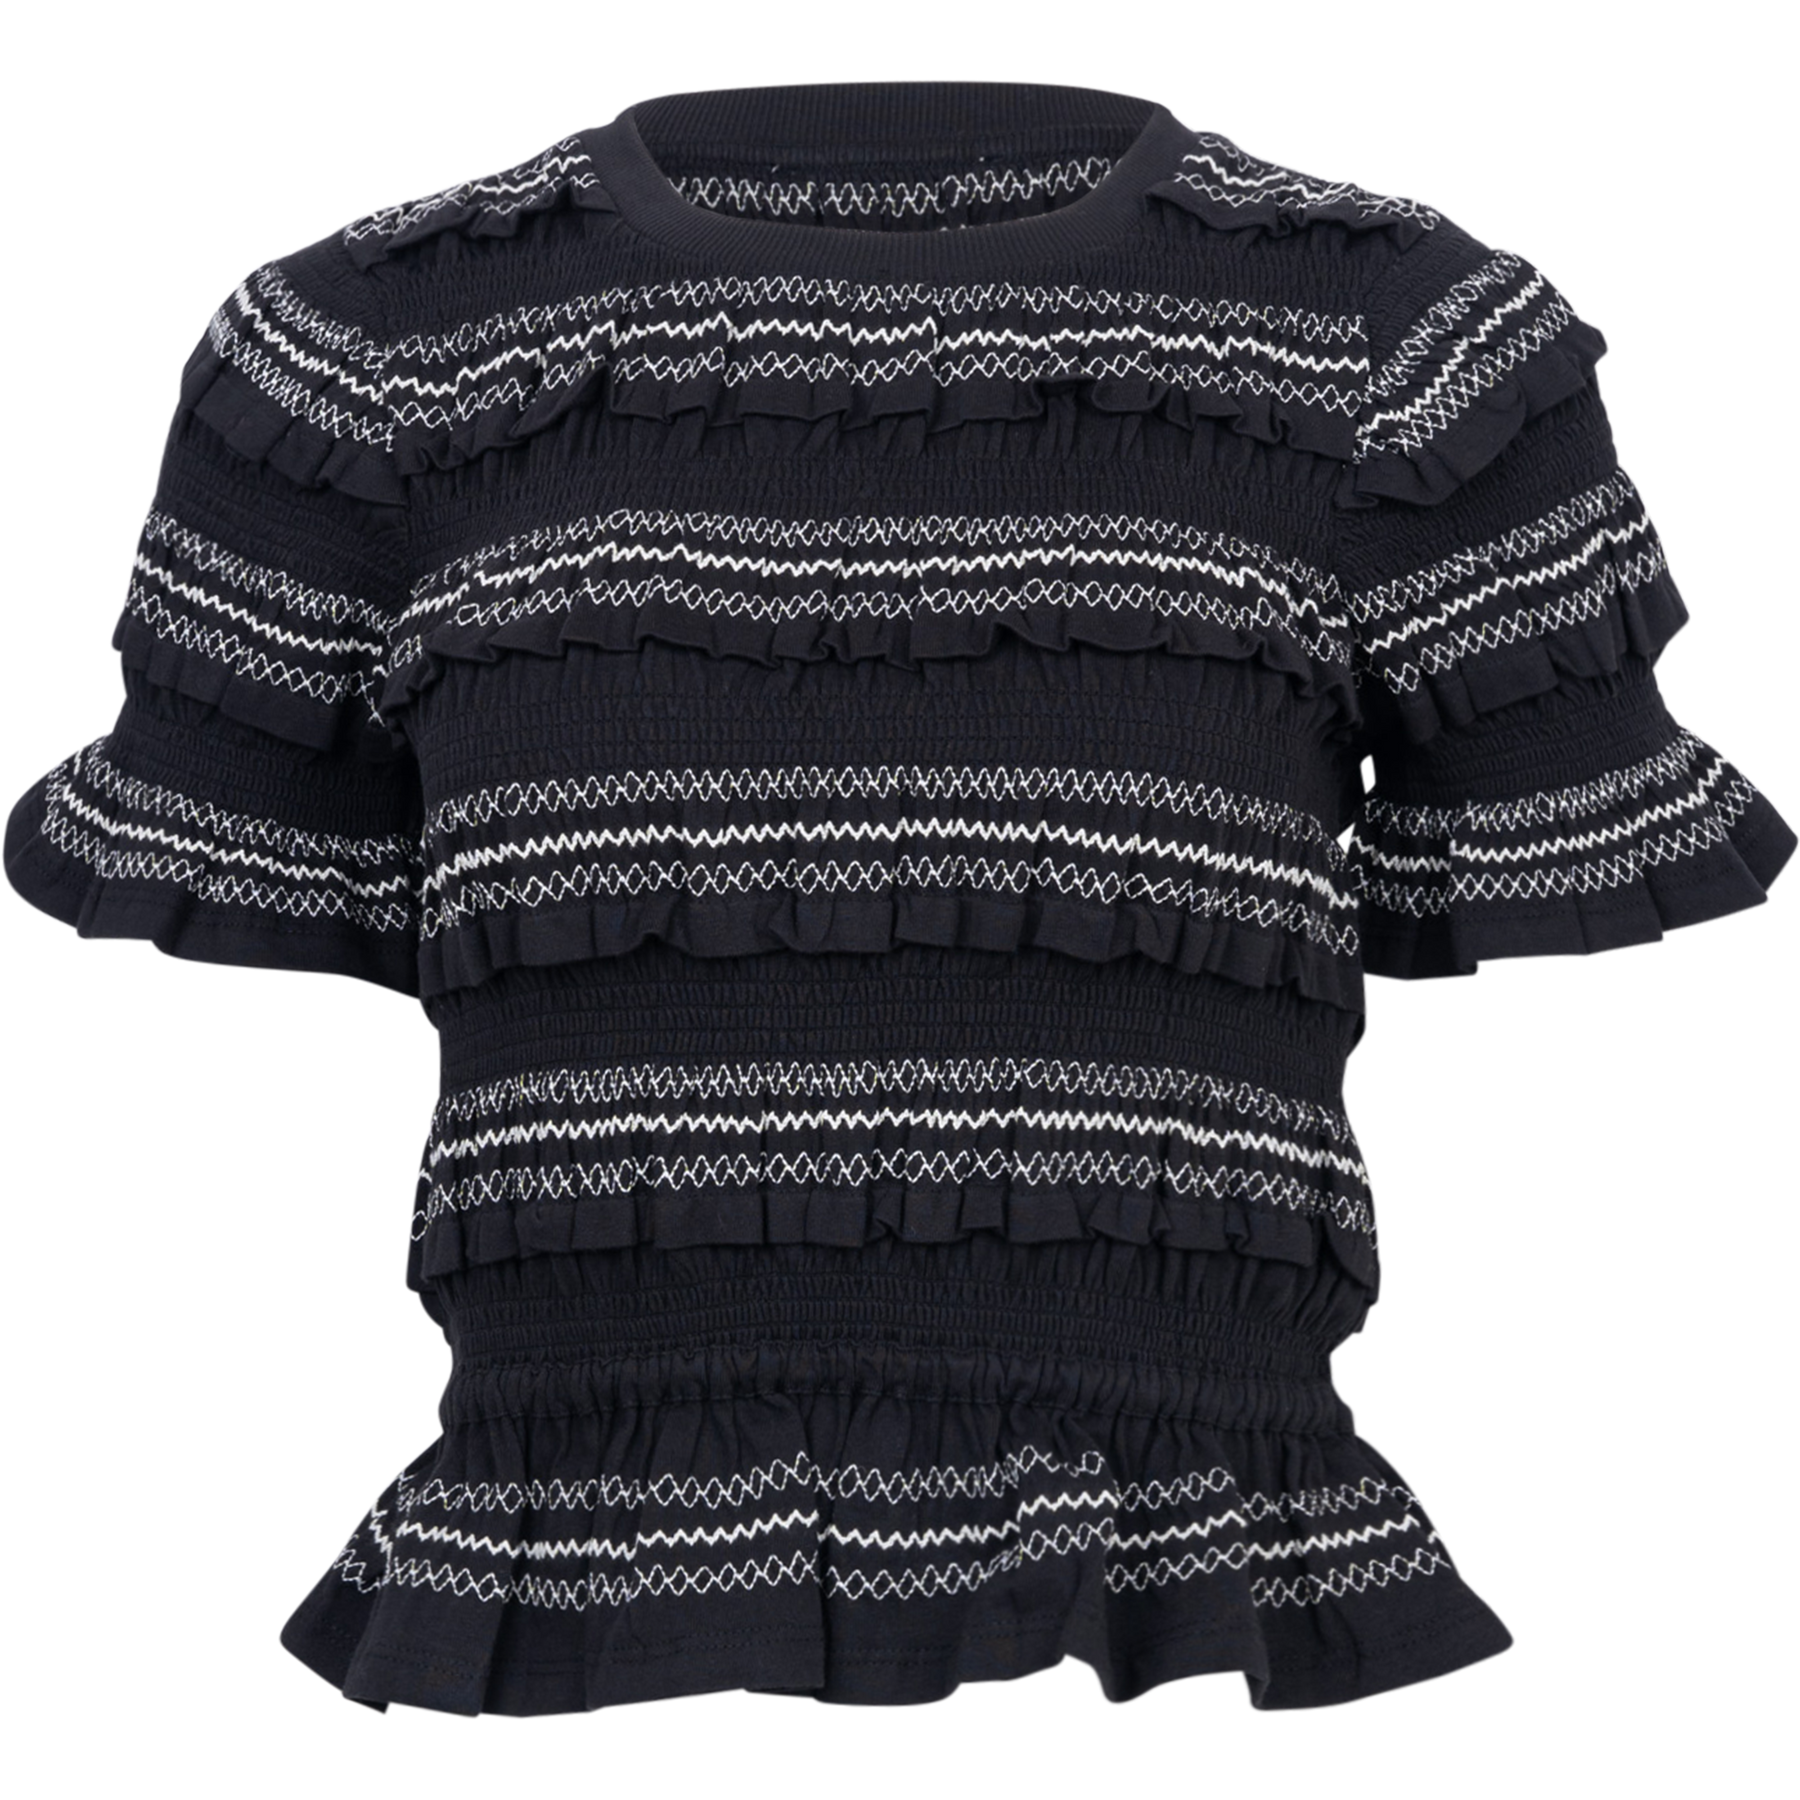 Mable Cambric S/Slv Smocked Top - Black